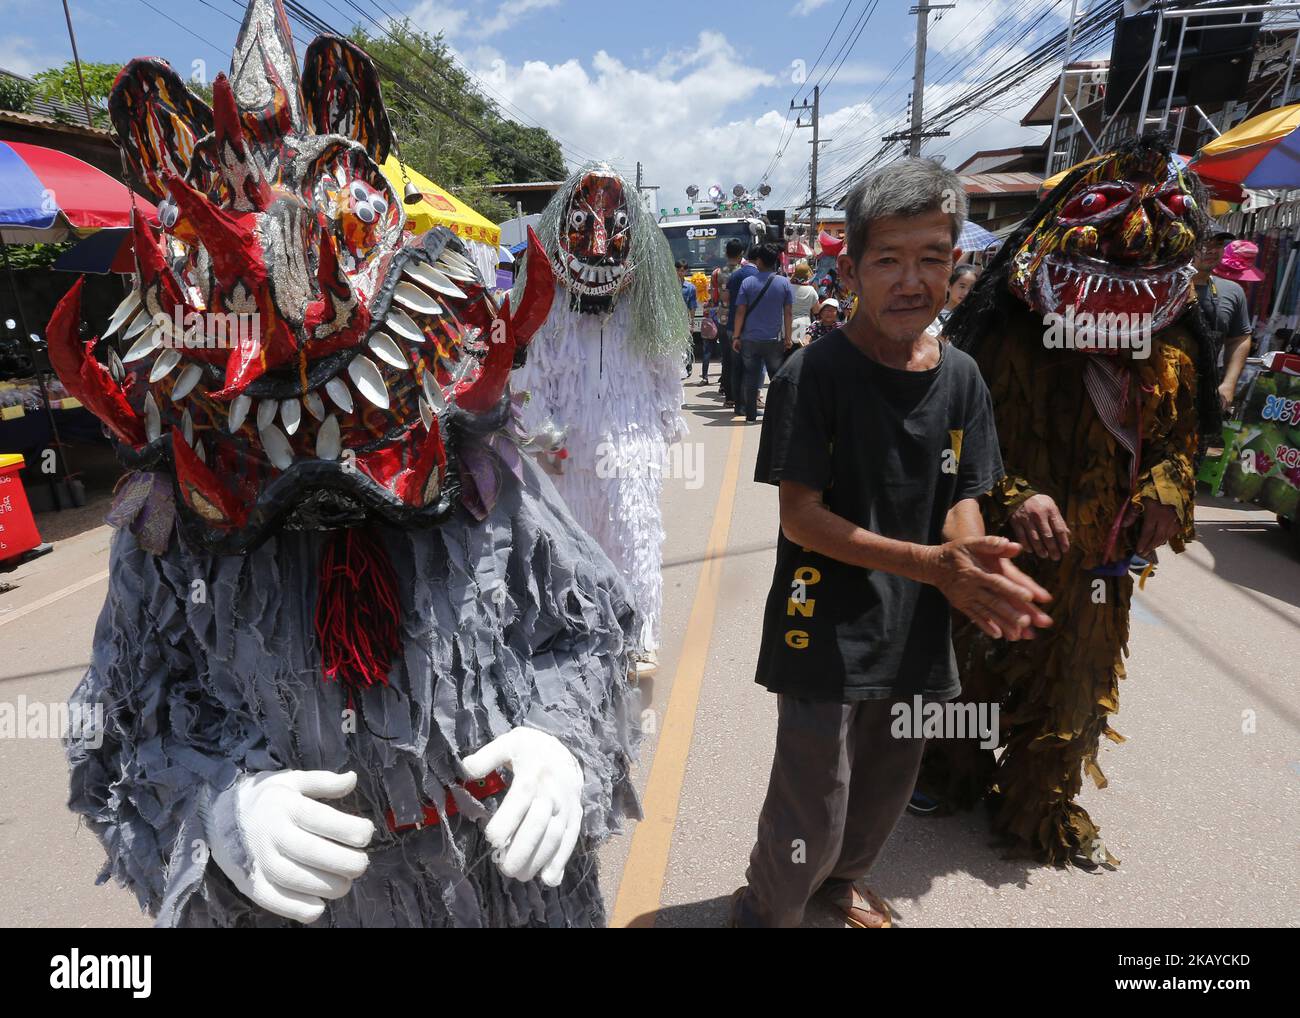 Thais wear masks representing the spirits of the dead springing back to life during the annual Phi Ta Khon, or Ghost festival in Dan Sai, Loei province, northeast of Bangkok on June 16, 2018. The event was held to promote tourism in Thailand. (Photo by Chaiwat Subprasom/NurPhoto) Stock Photo